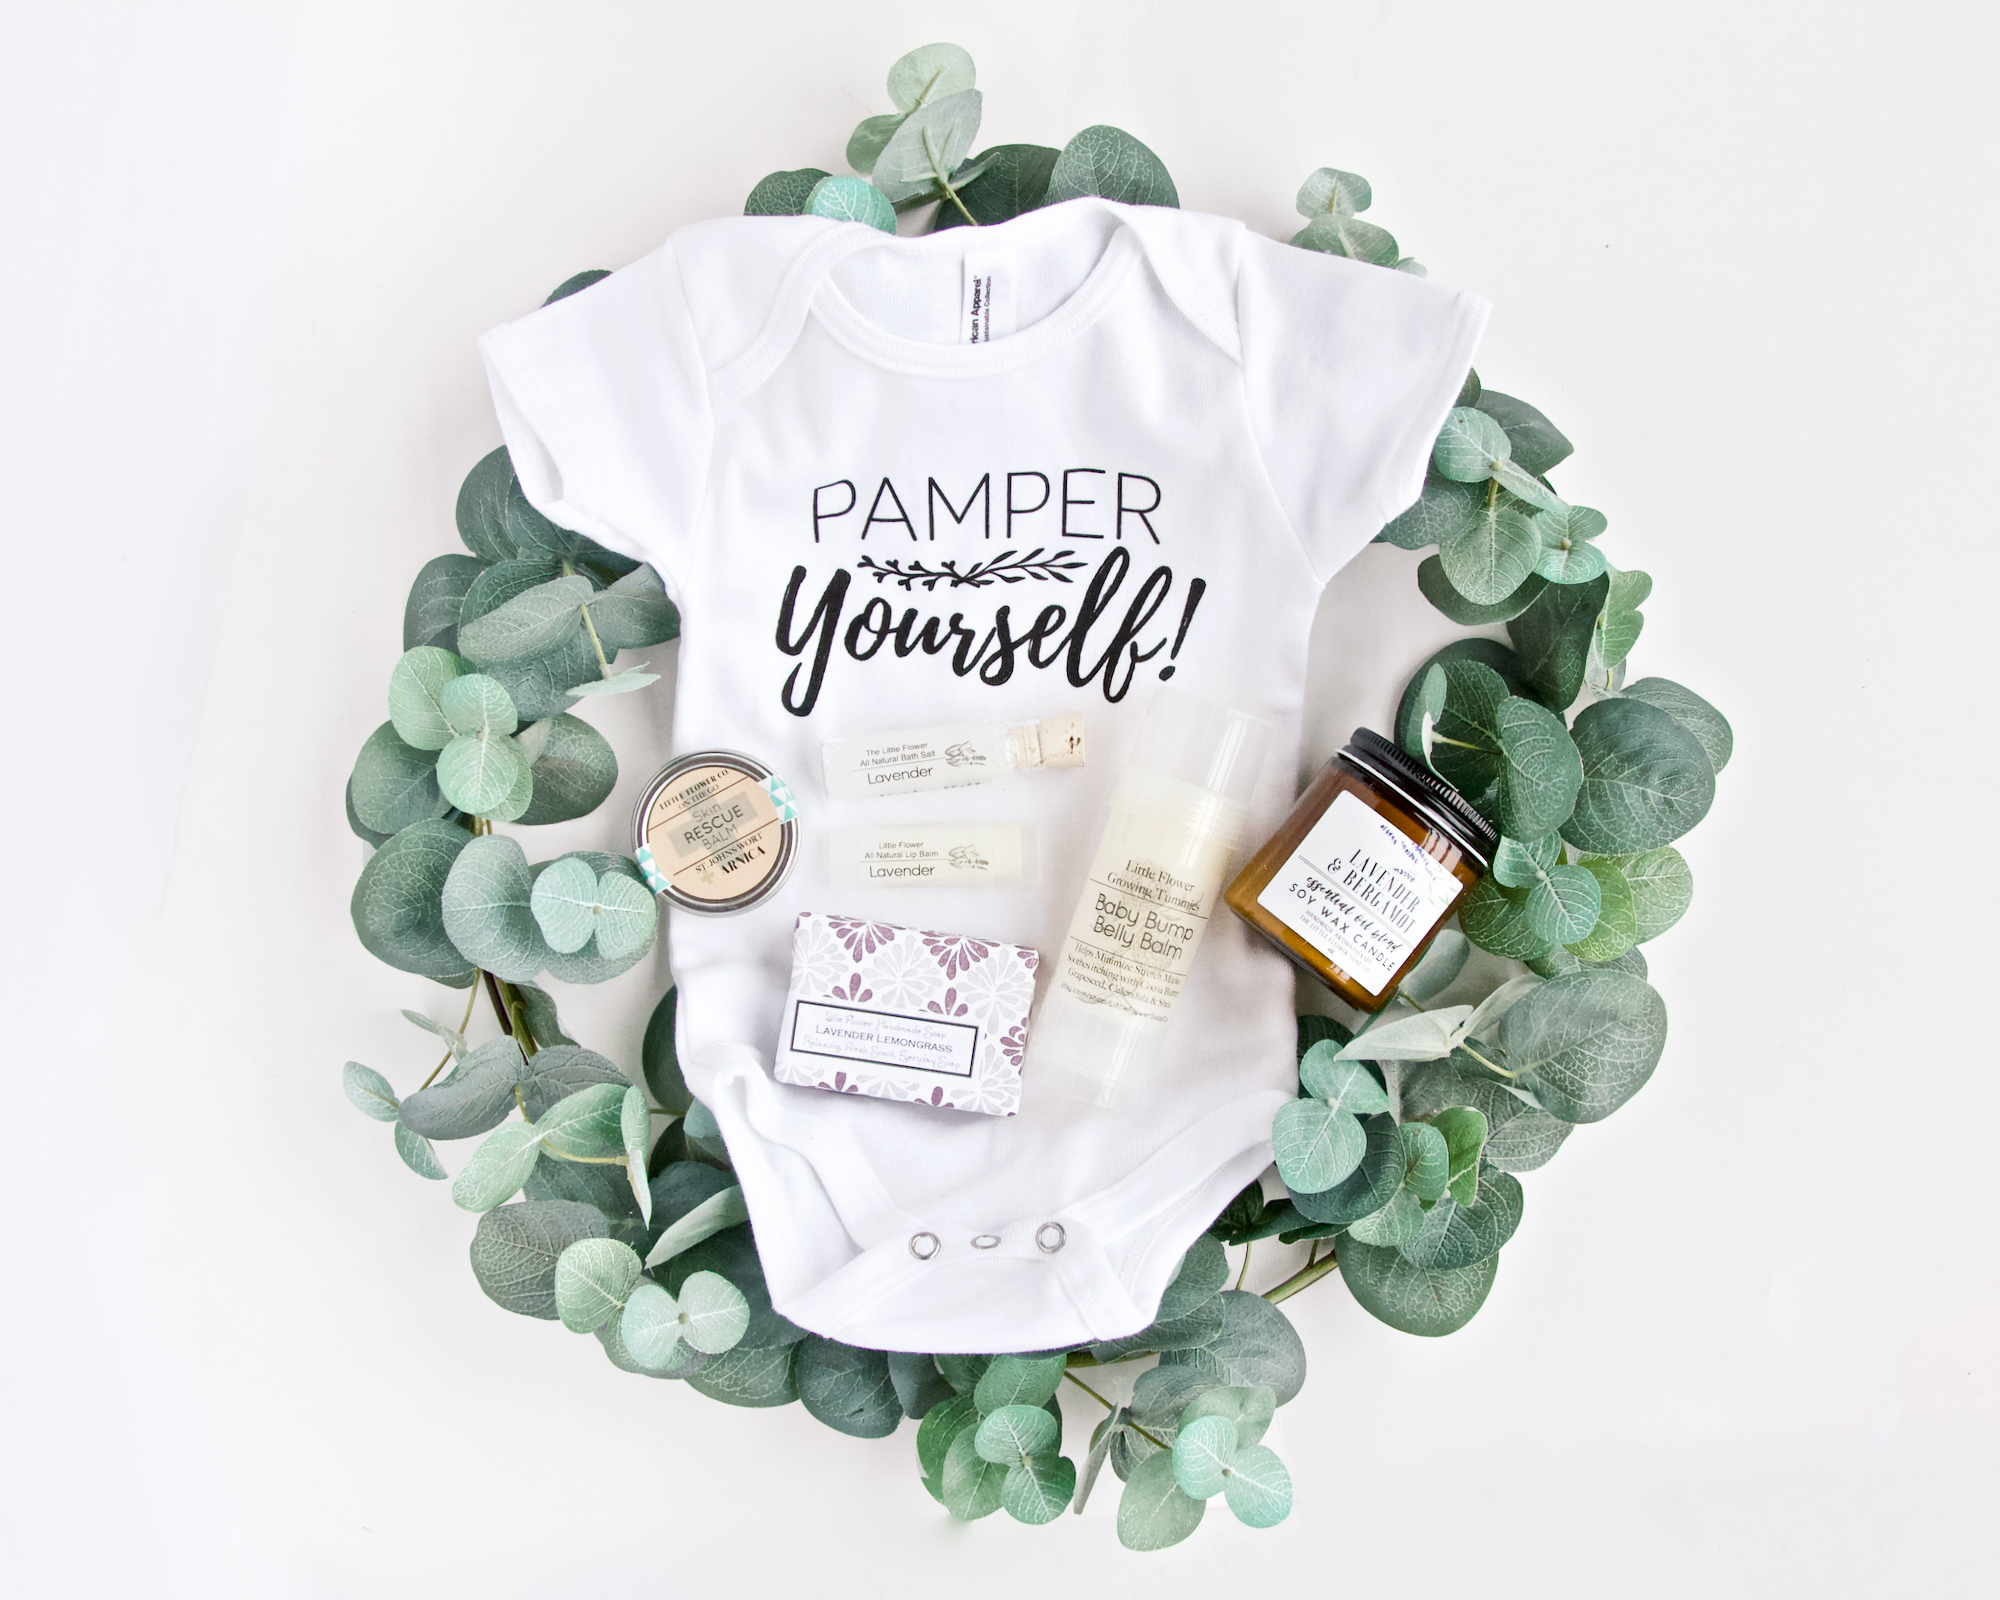 Gift for New Mom - Pregnancy Spa Gift Set – The Dancing Wick